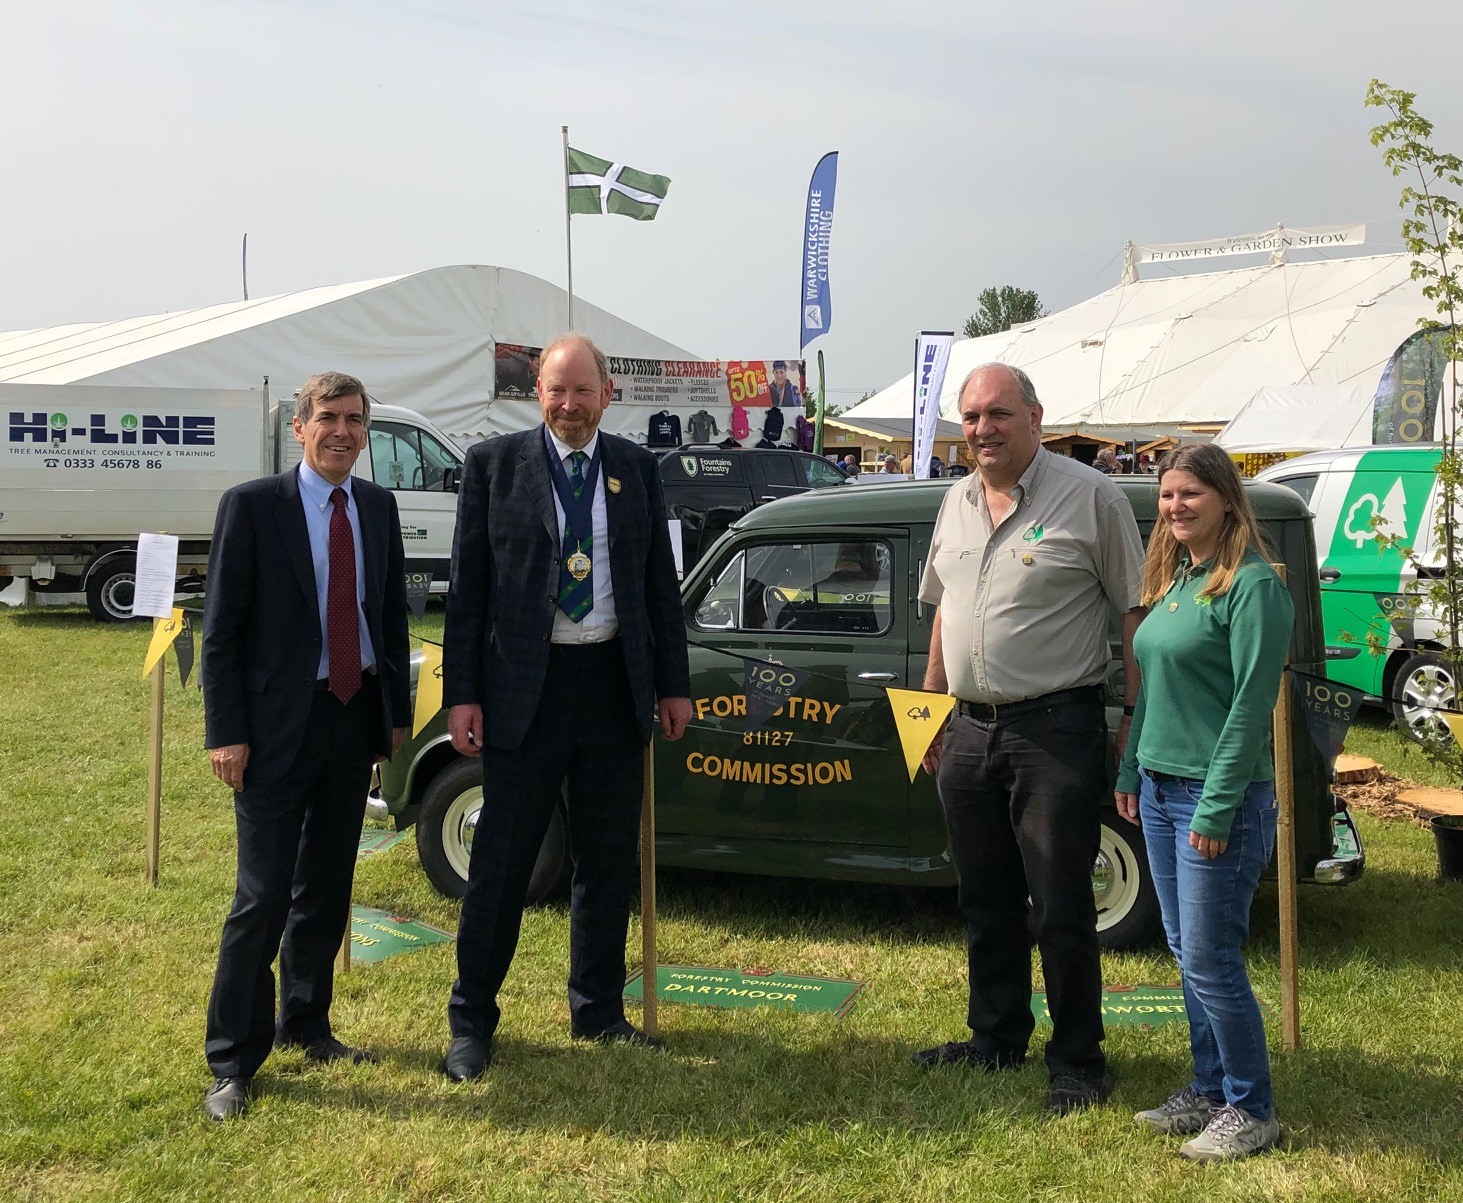 image of minister Rutley, sir Harry Studholme and two members of the forestry commission standing in a field in front of a green car. The car has a sign on the door saying ‘forestry commission’.